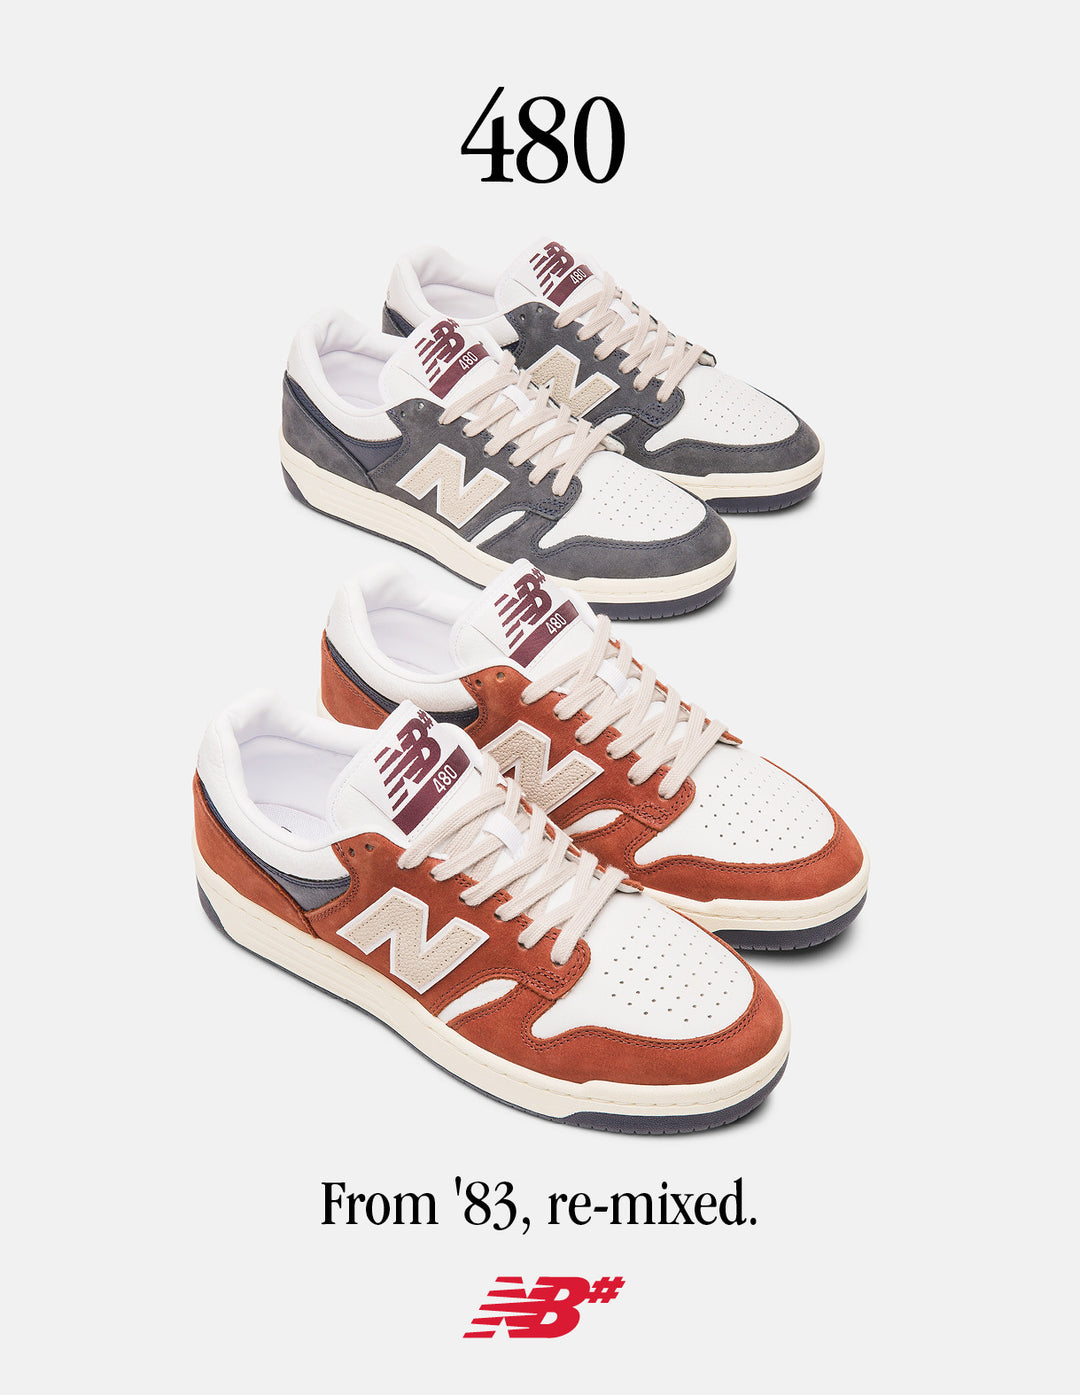 New Balance 480 - Releases 8/11